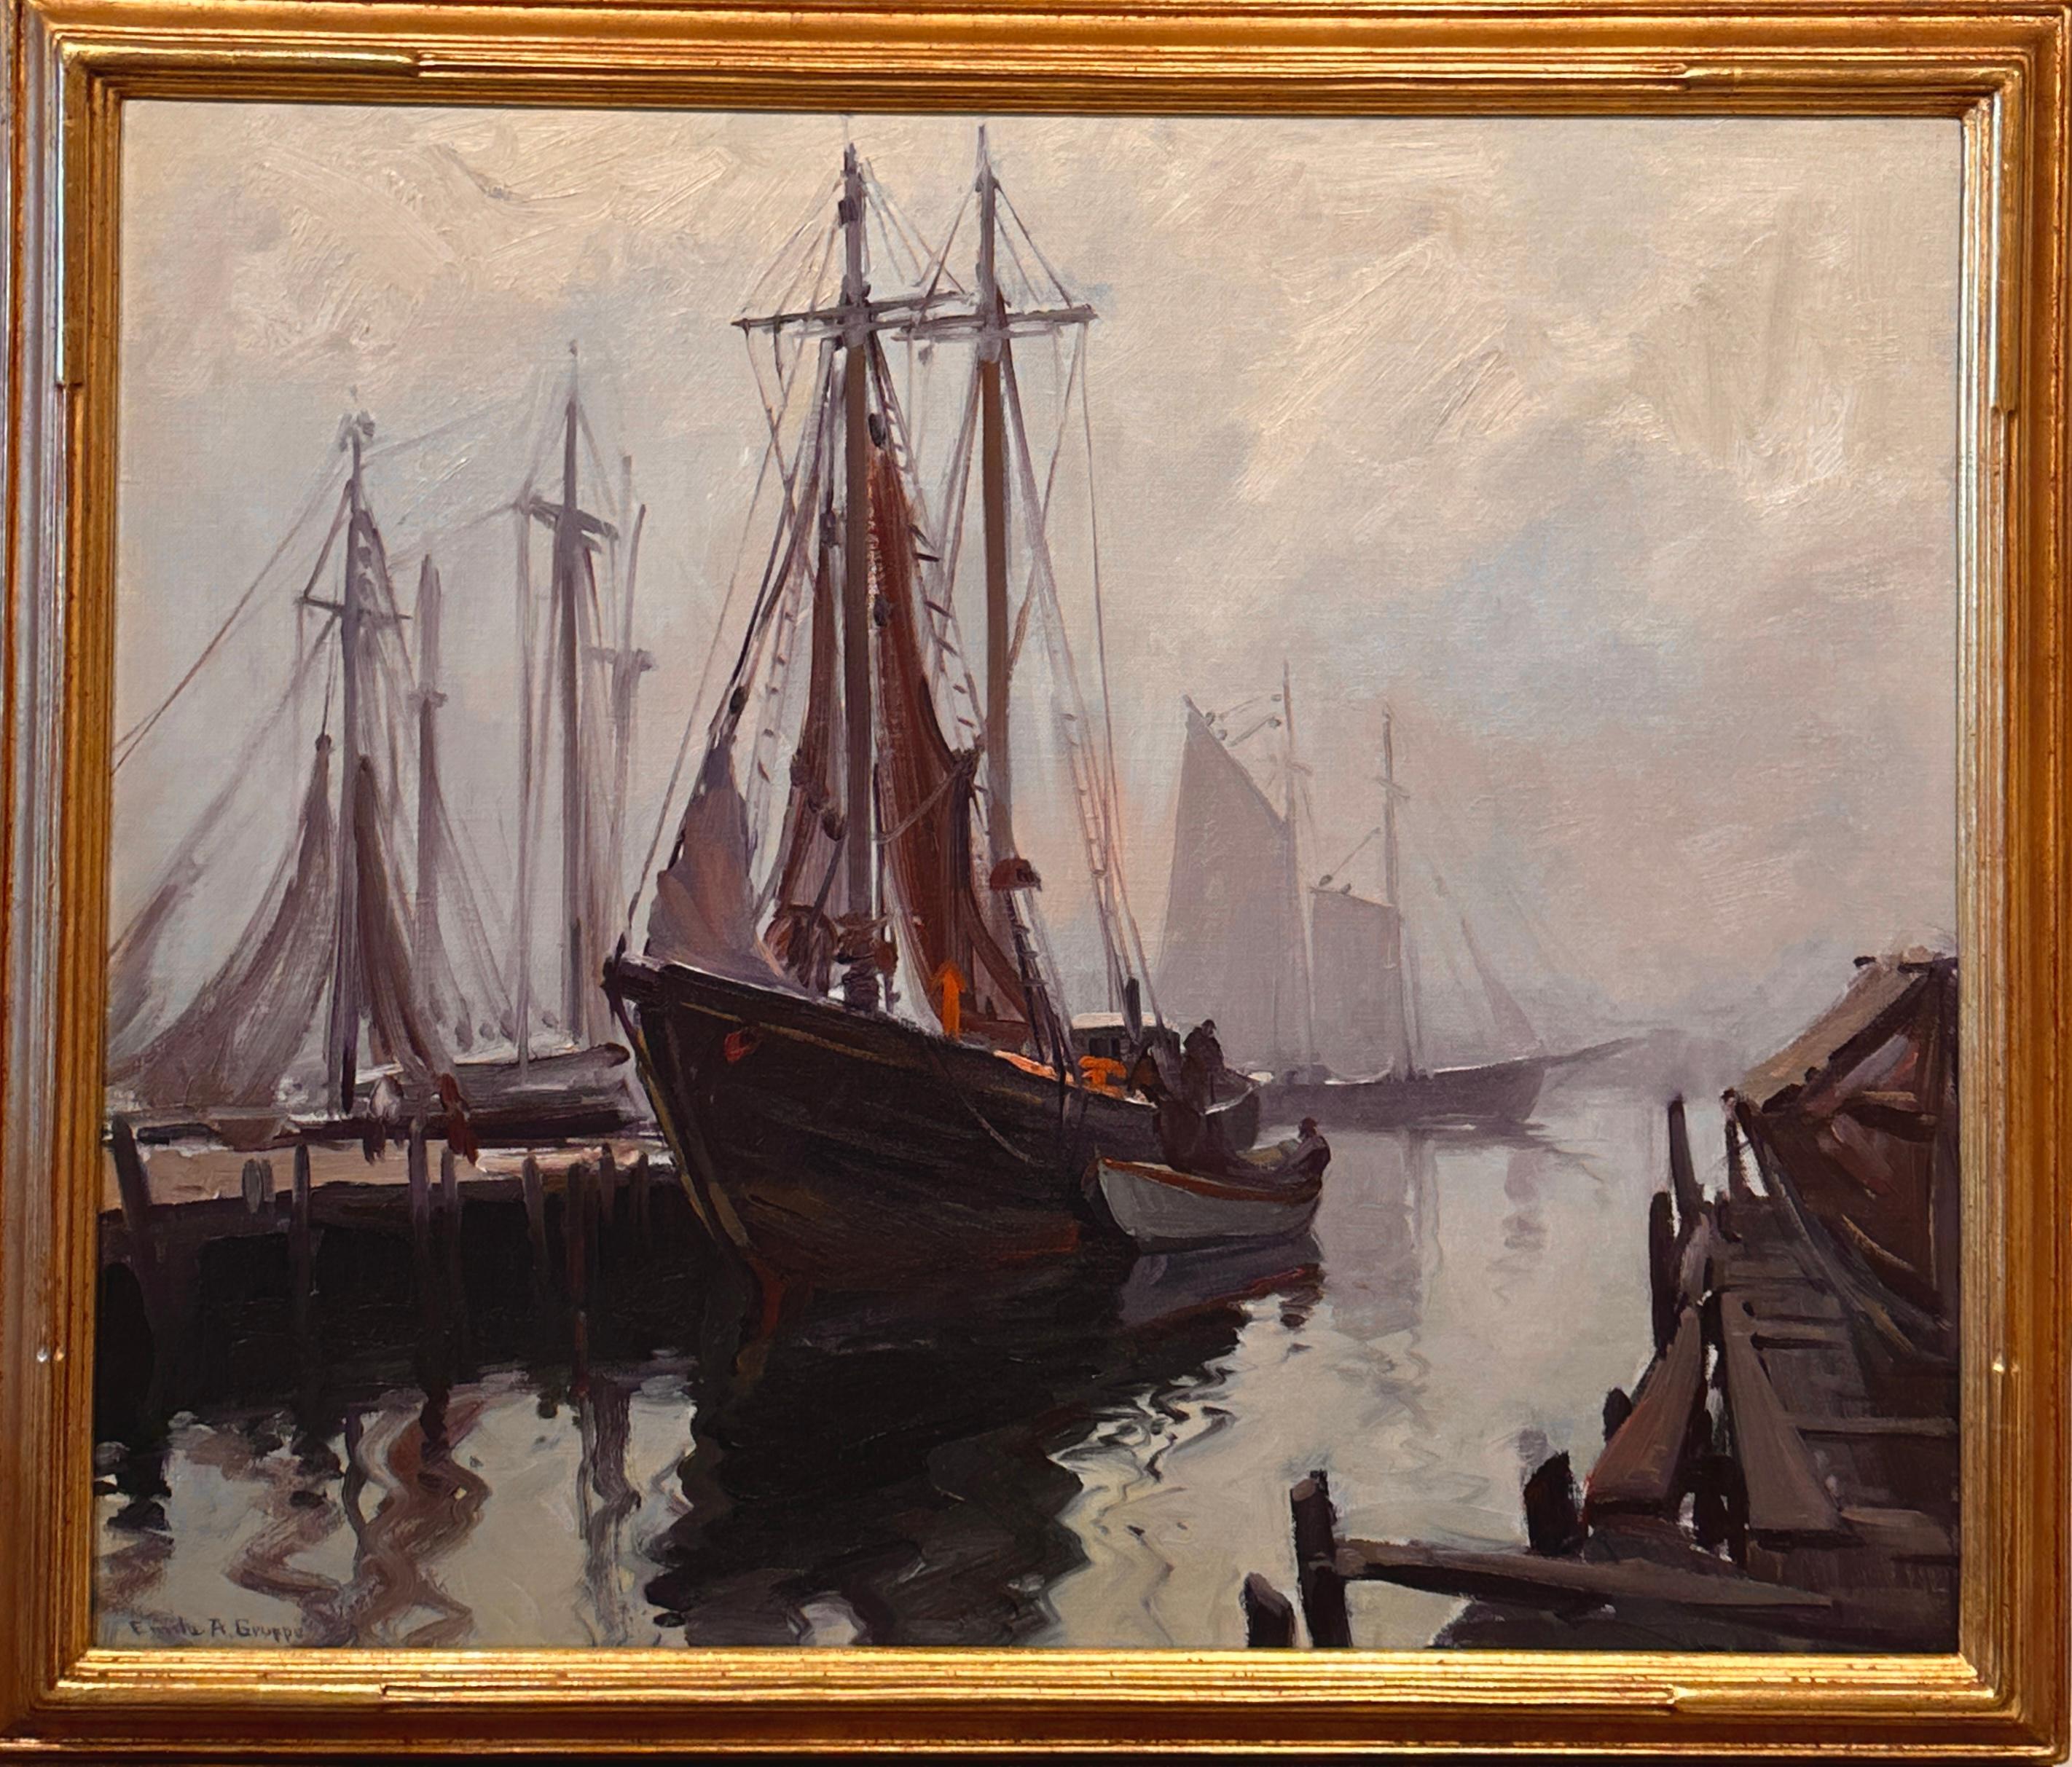 Wonderful mood in this oil painting by the Cape Ann Master Impressionist, Emile Gruppe.  